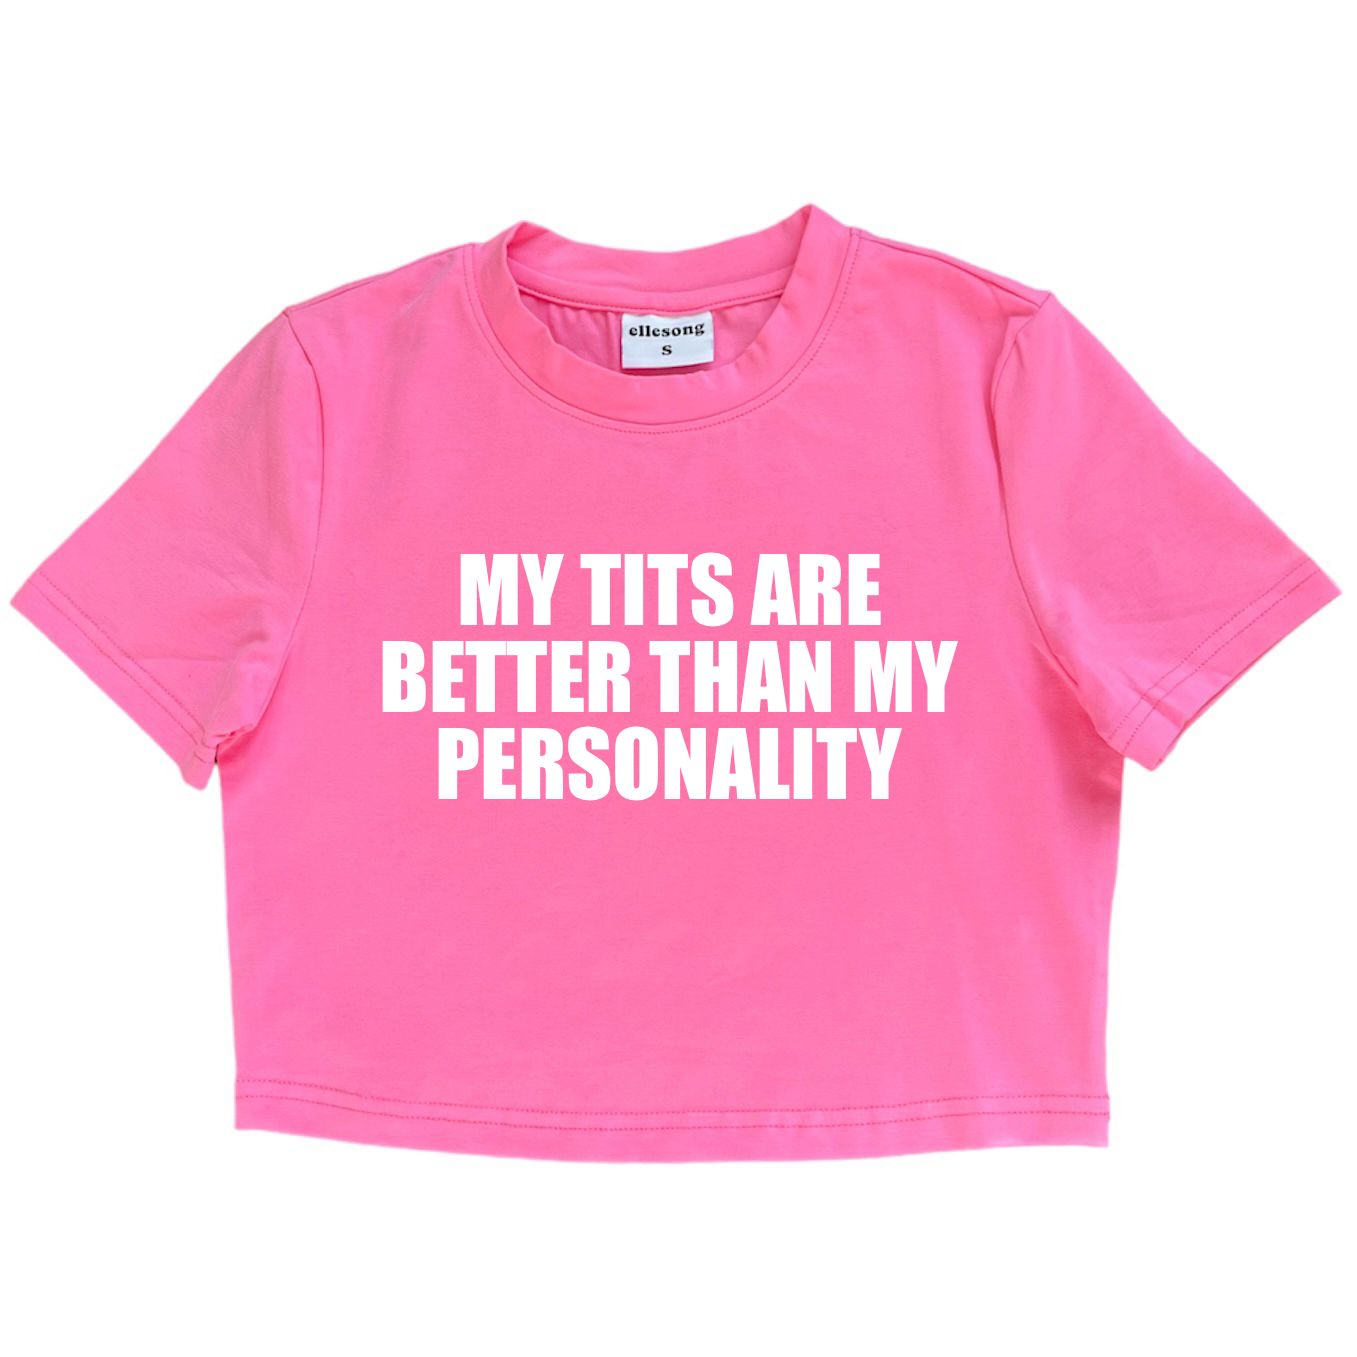 My Tits Are Better Than My Personality Baby Tee